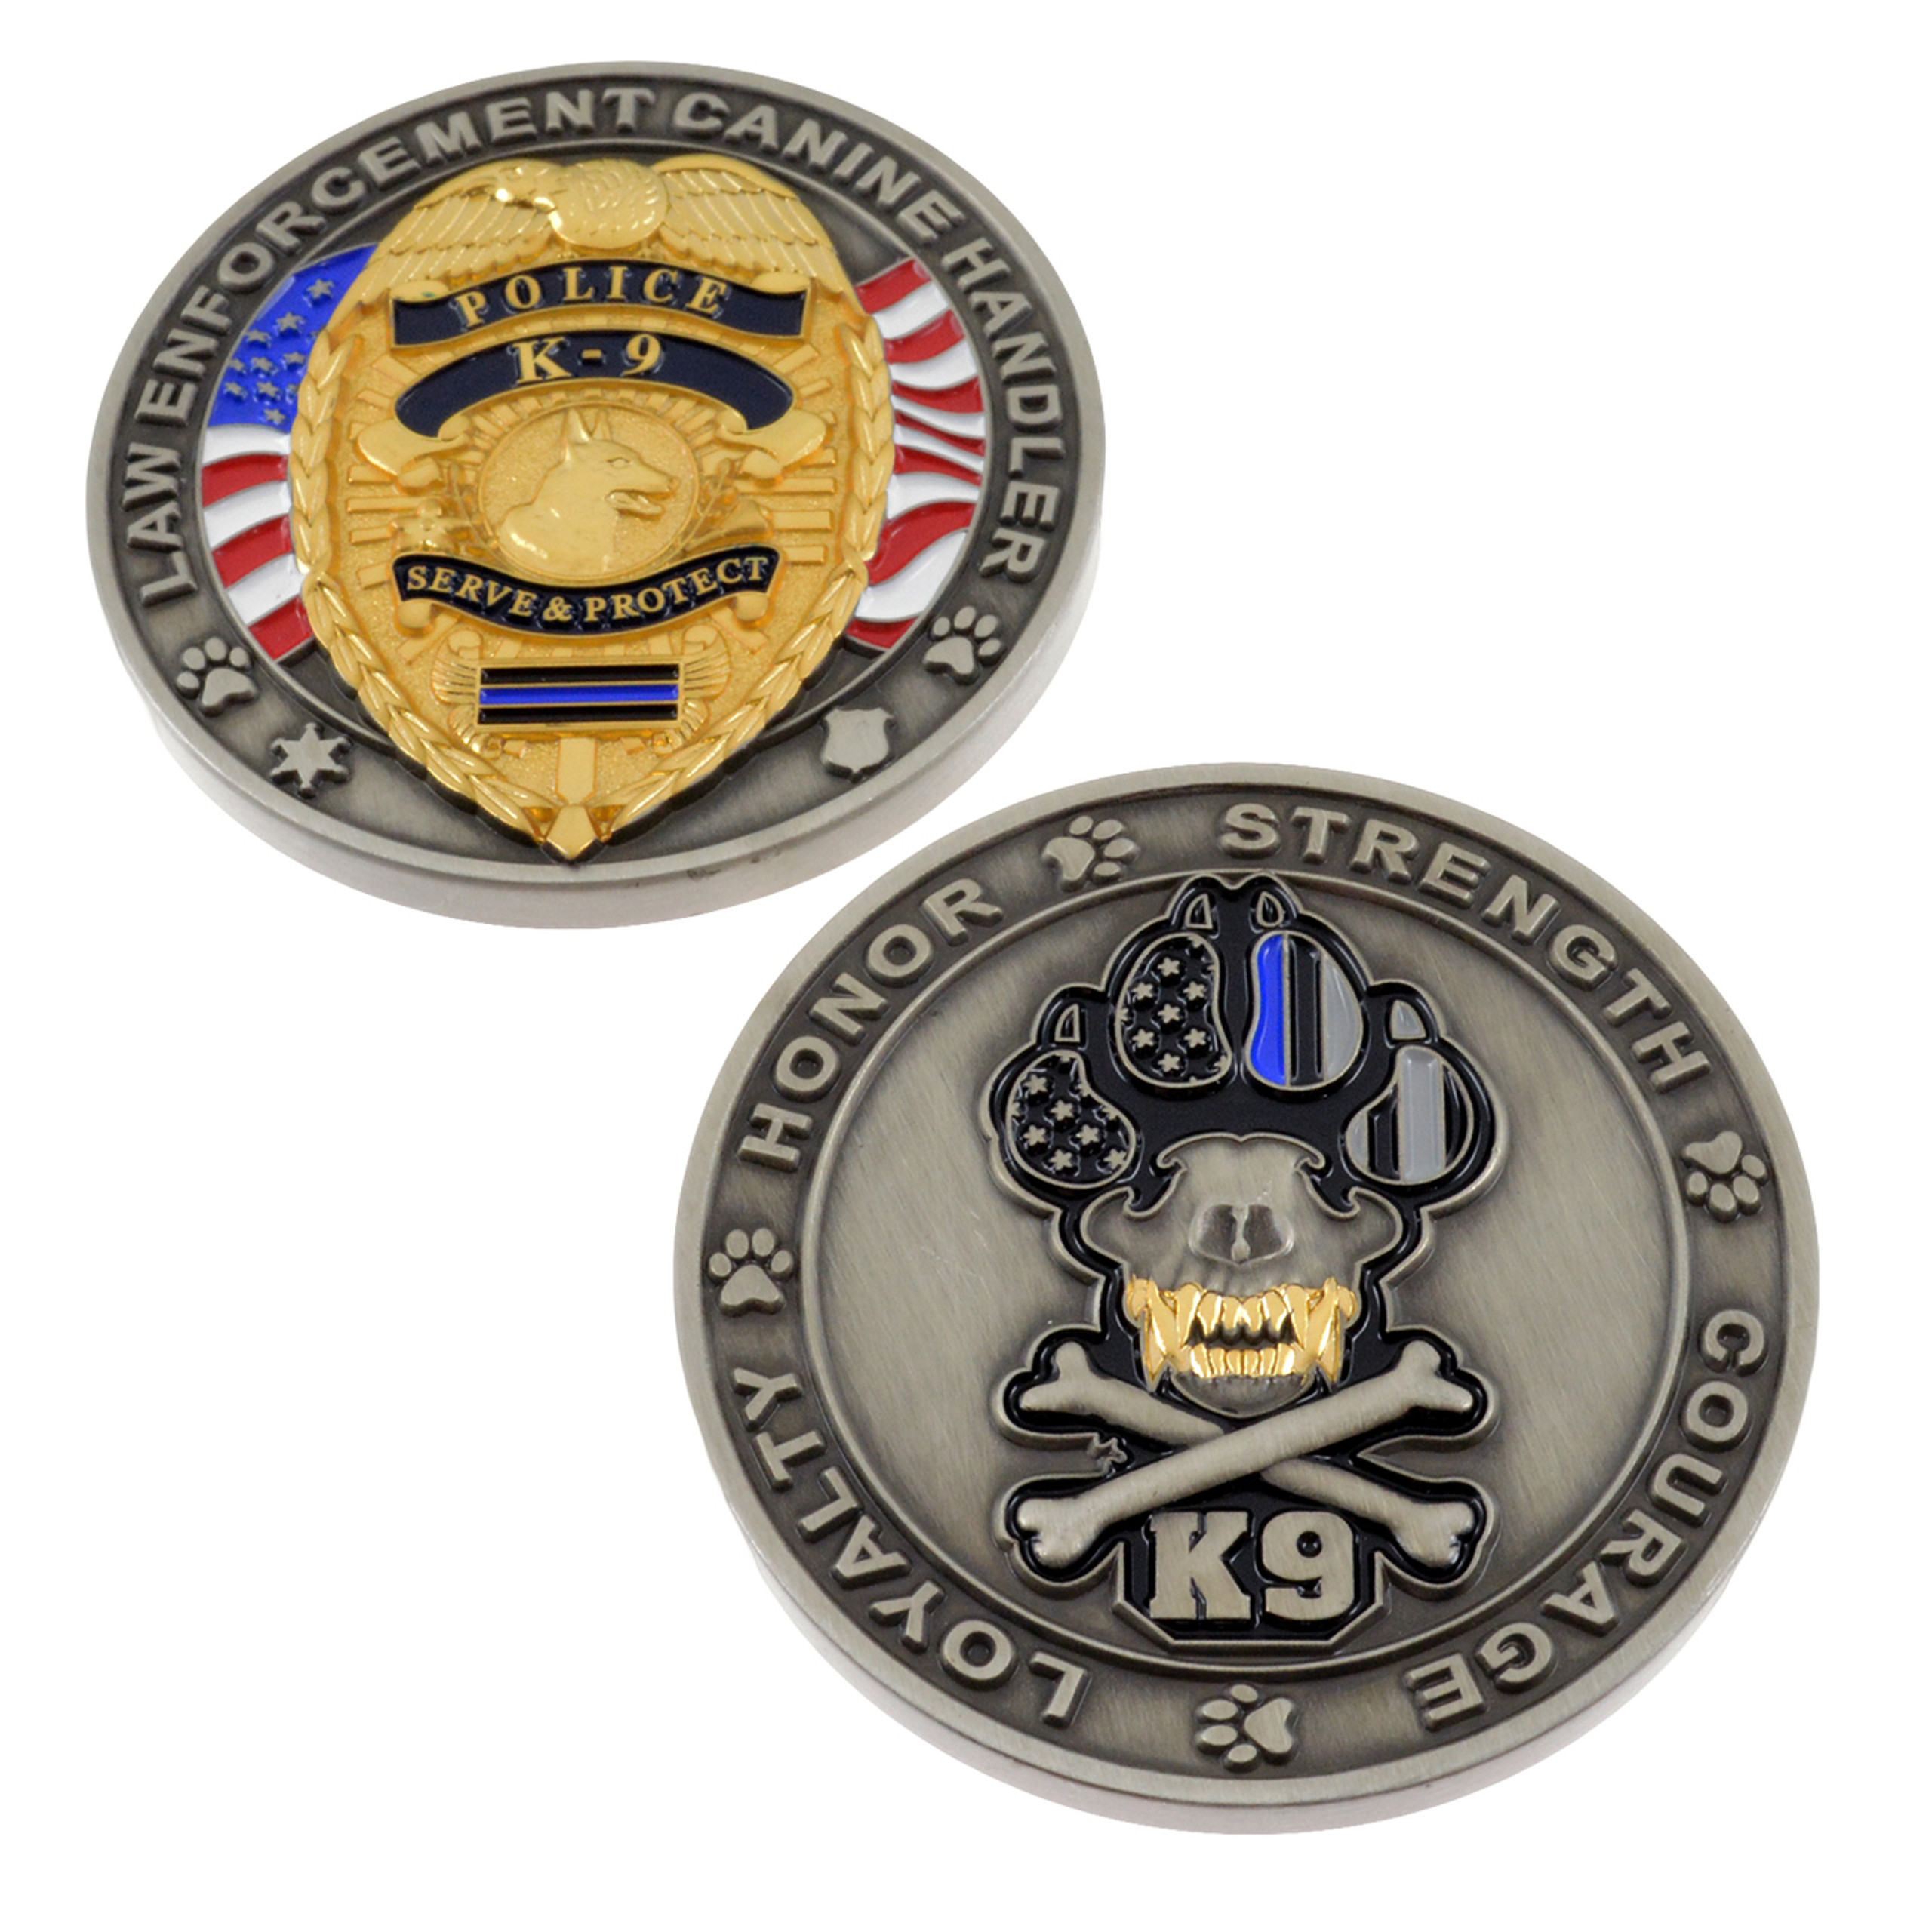 FLETC Firearms Instructor Challenge Coin